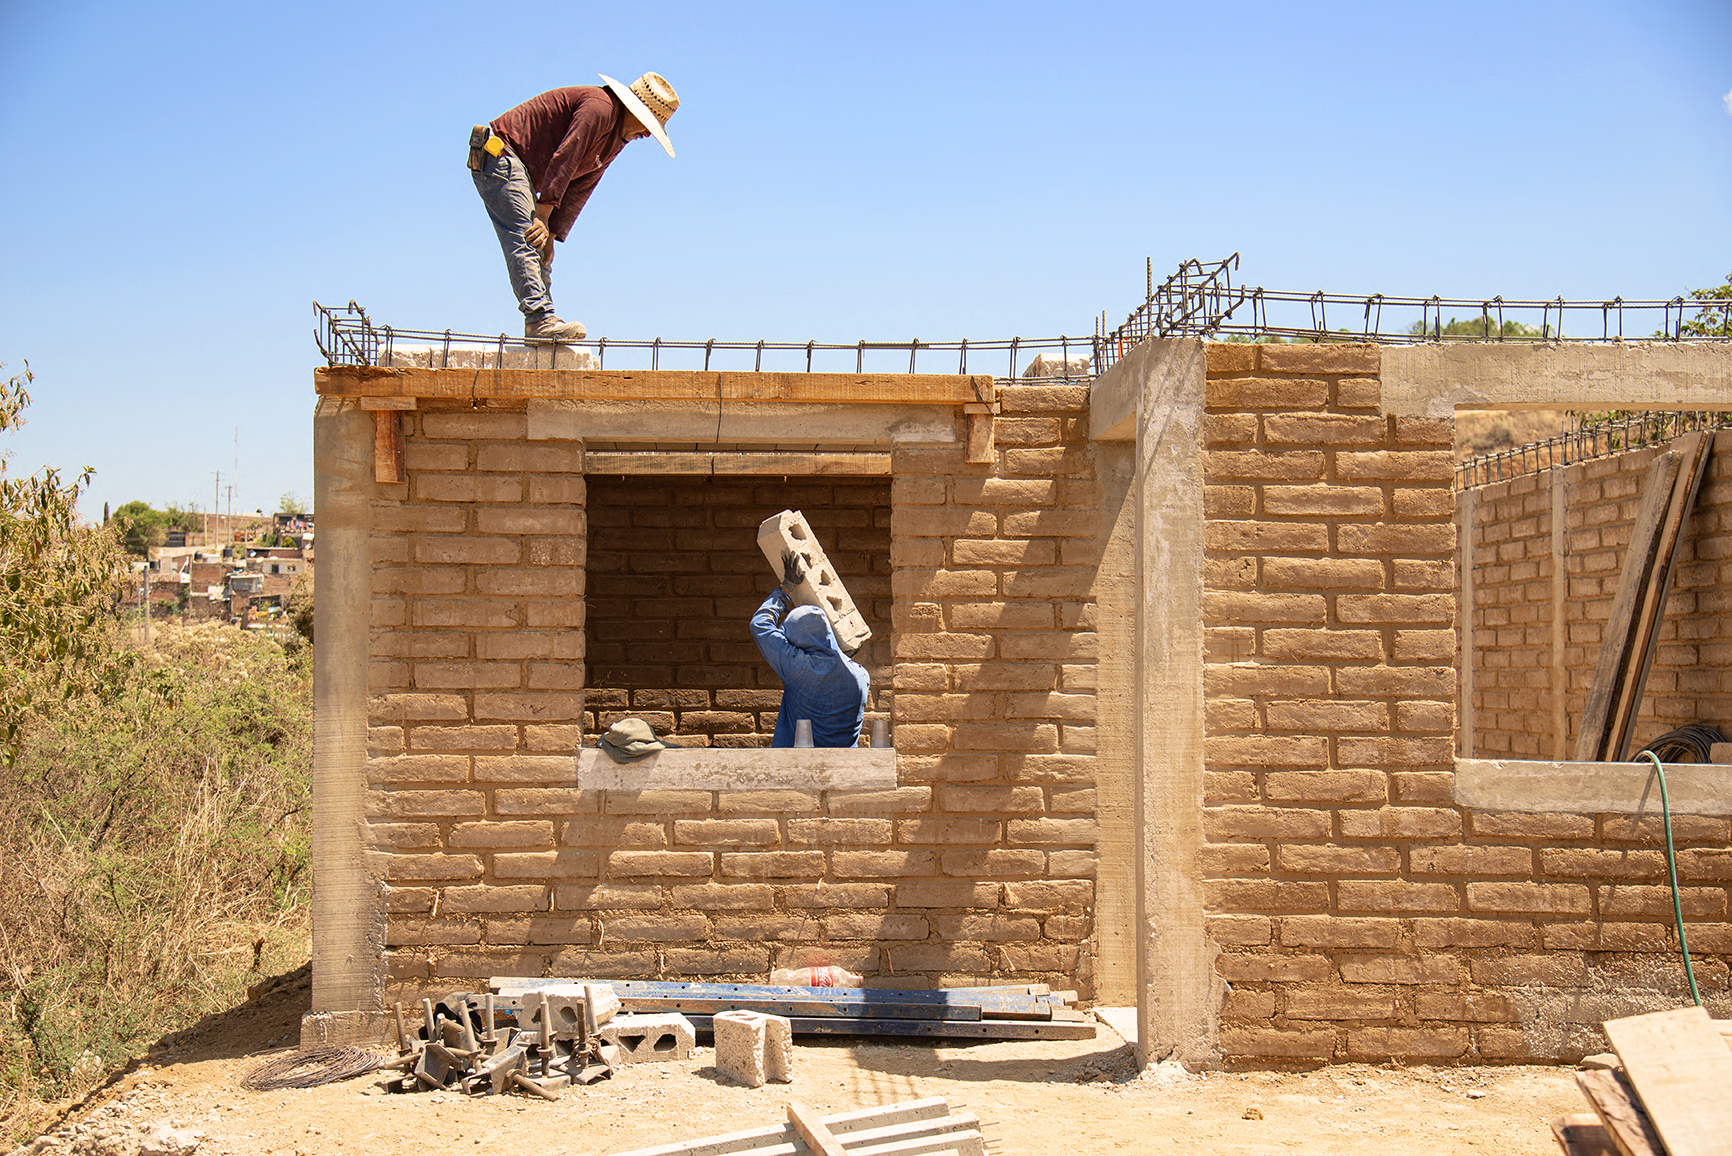 This Earth Day, Astral Tequila is proud to announce that the construction of 10 homes for families in Jalisco, MX is underway through trusted partners with the brand’s ongoing sustainability program, The Adobe Brick Project.